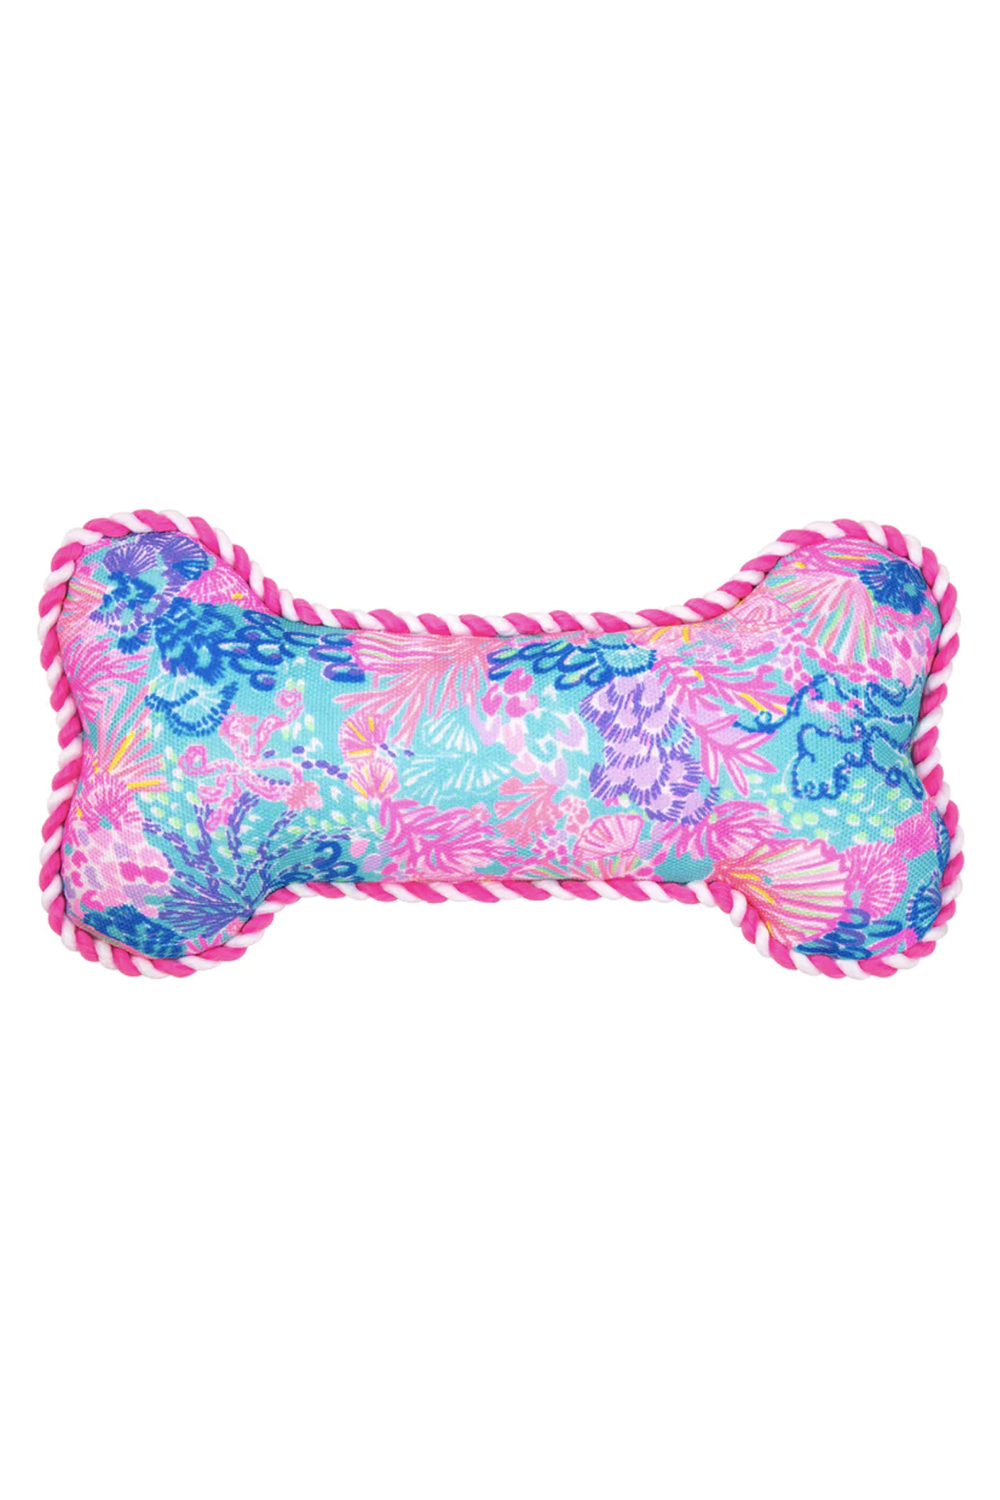 Lilly Pulitzer Dog Toy - Splendor in the Sand